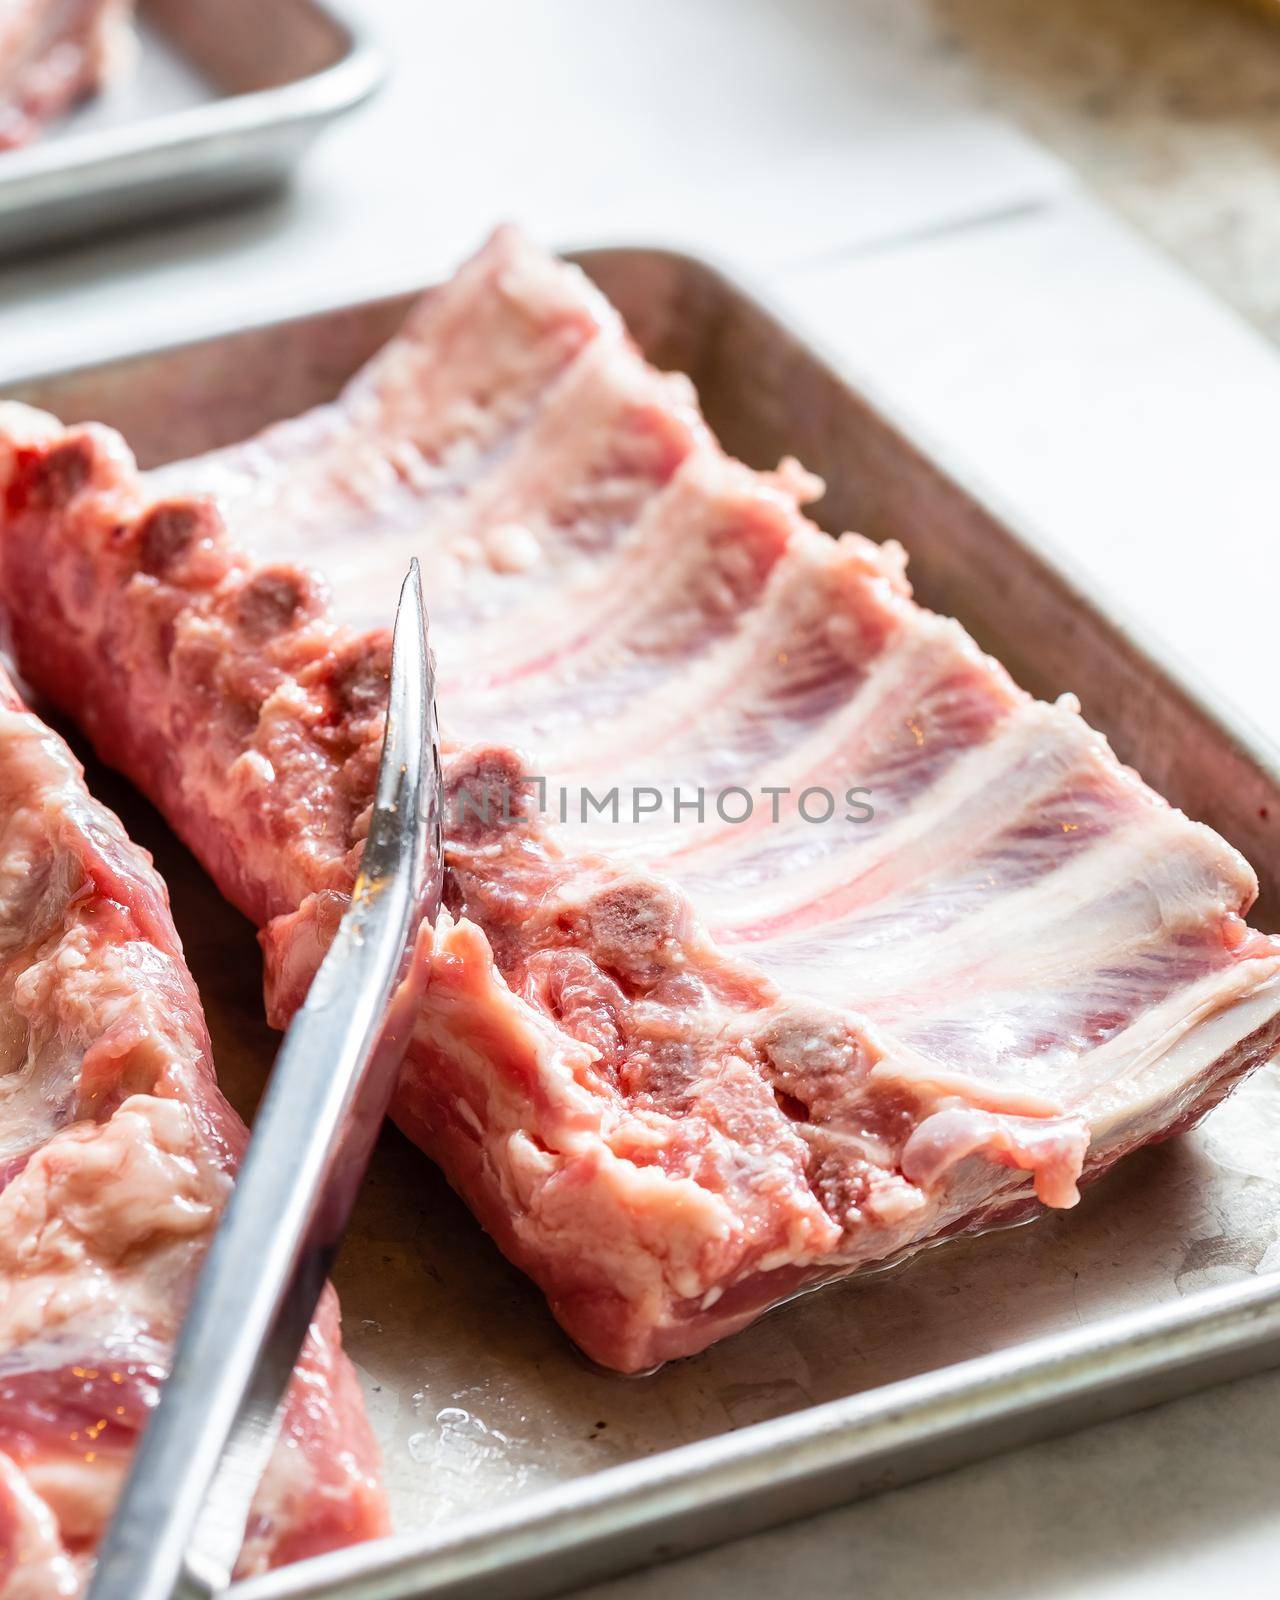 Spare ribs uncooked on stainless steel platter. by Syvanych